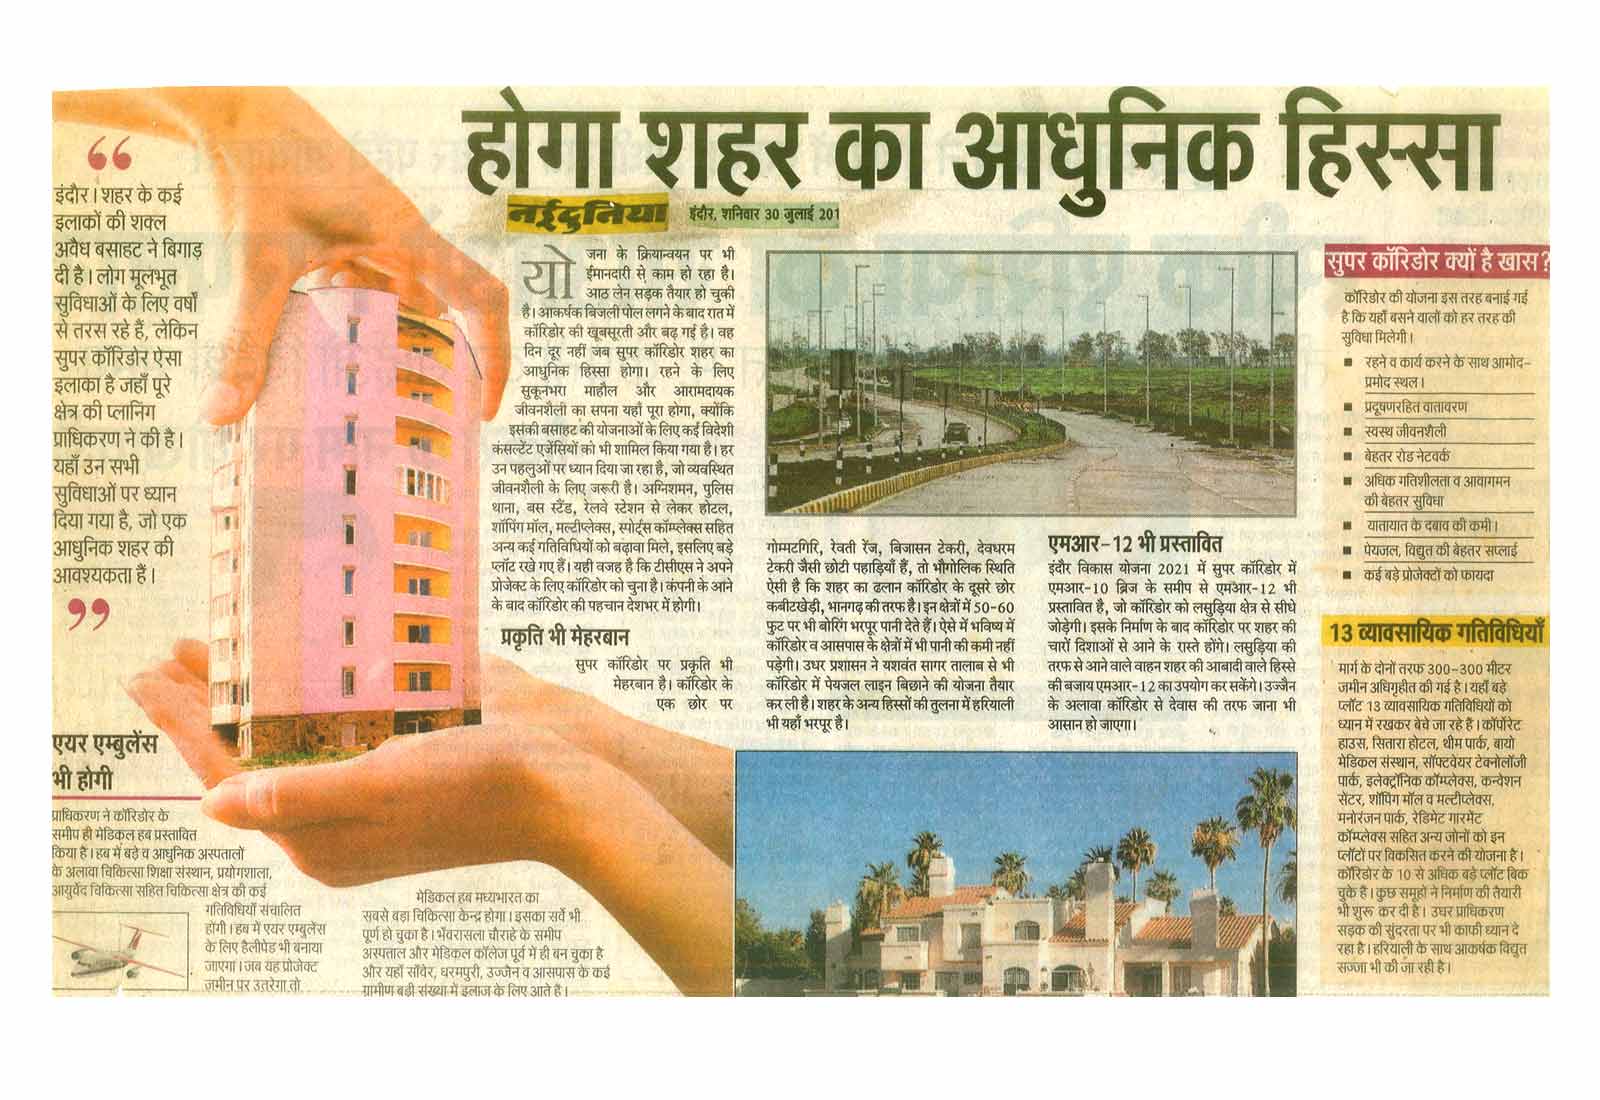 Super Corridor will be the most advanced part of Indore